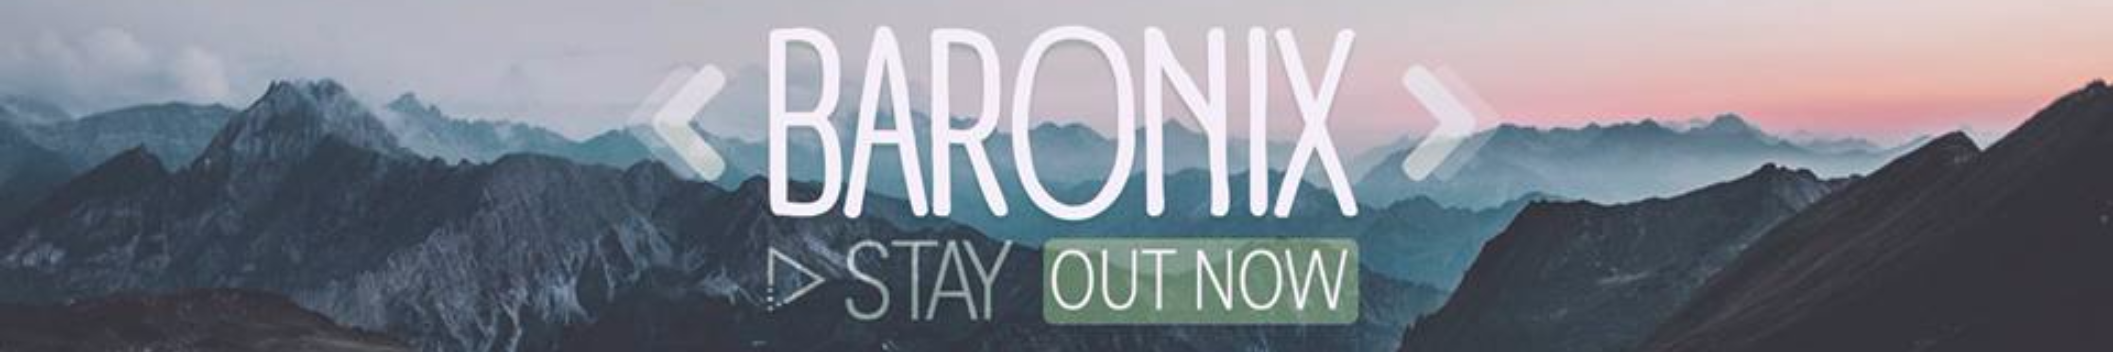 Baronix_official